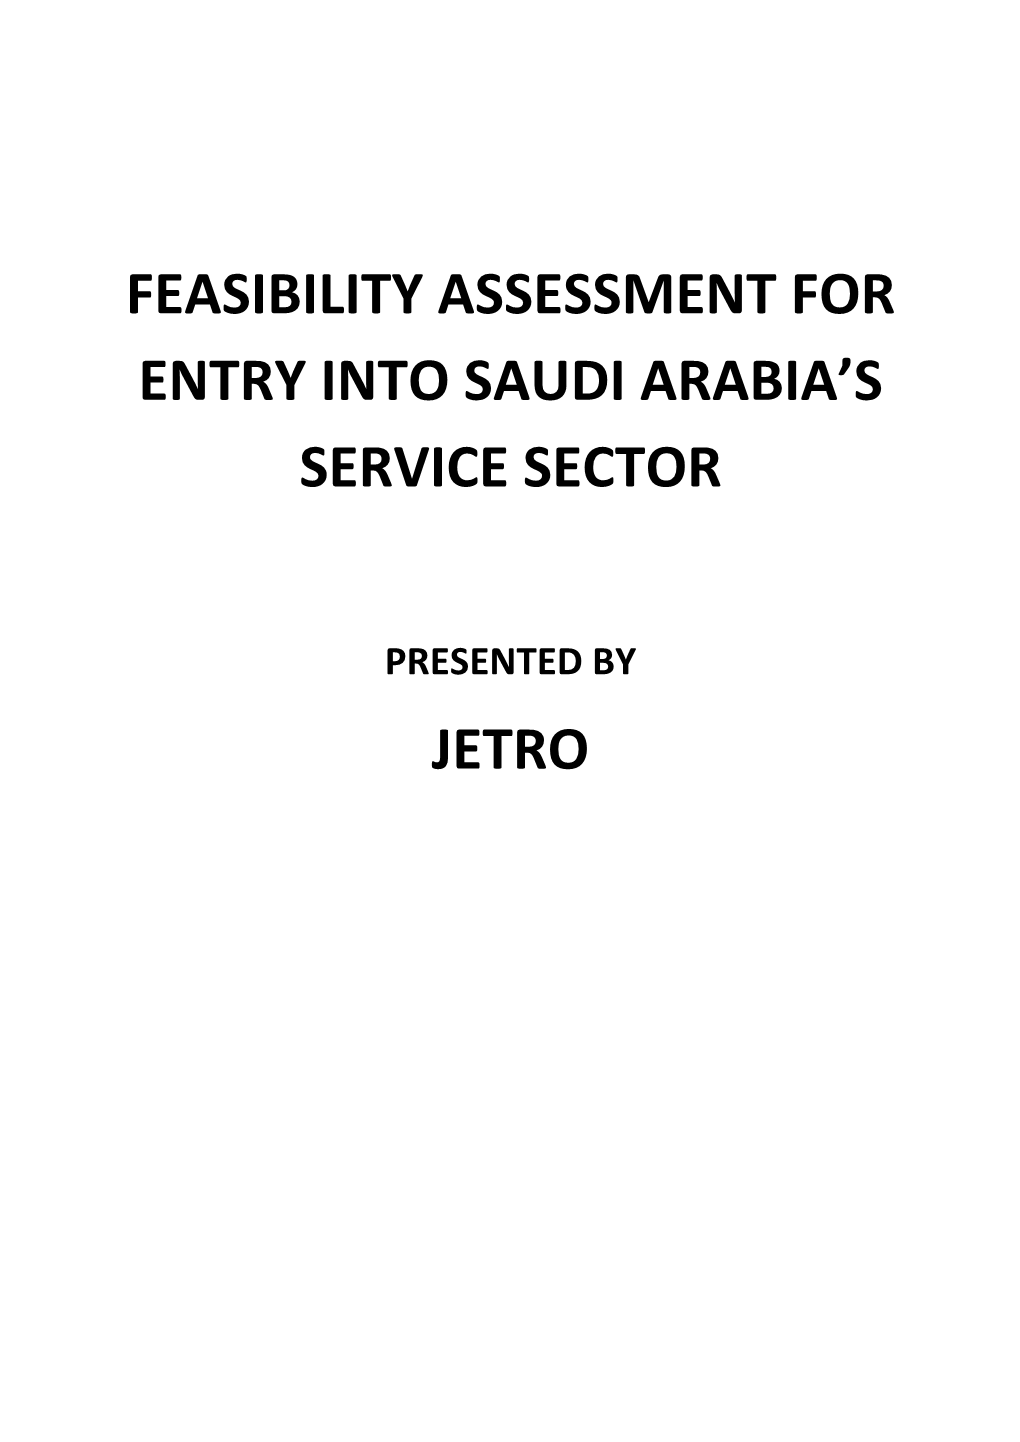 Feasibility Assessment for Entry Into Saudi Arabia's Service Sector